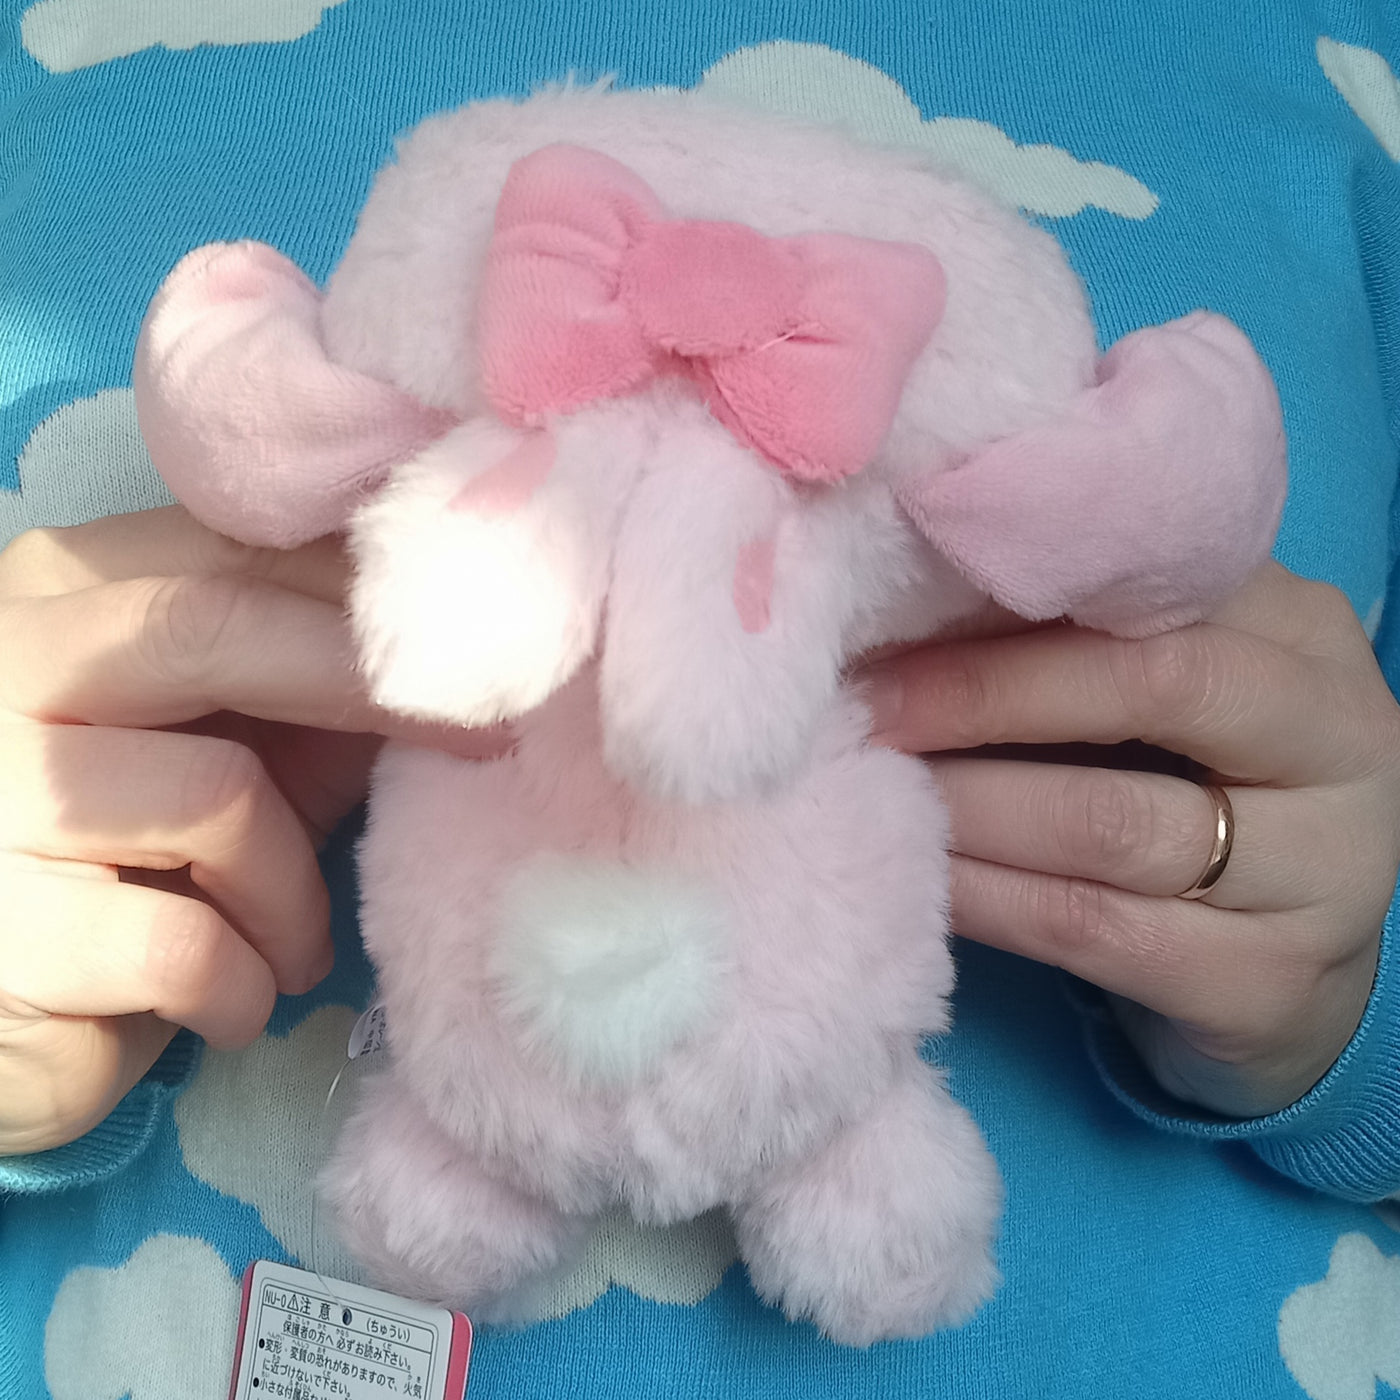 My Melody in bunny suit plush (15cm)